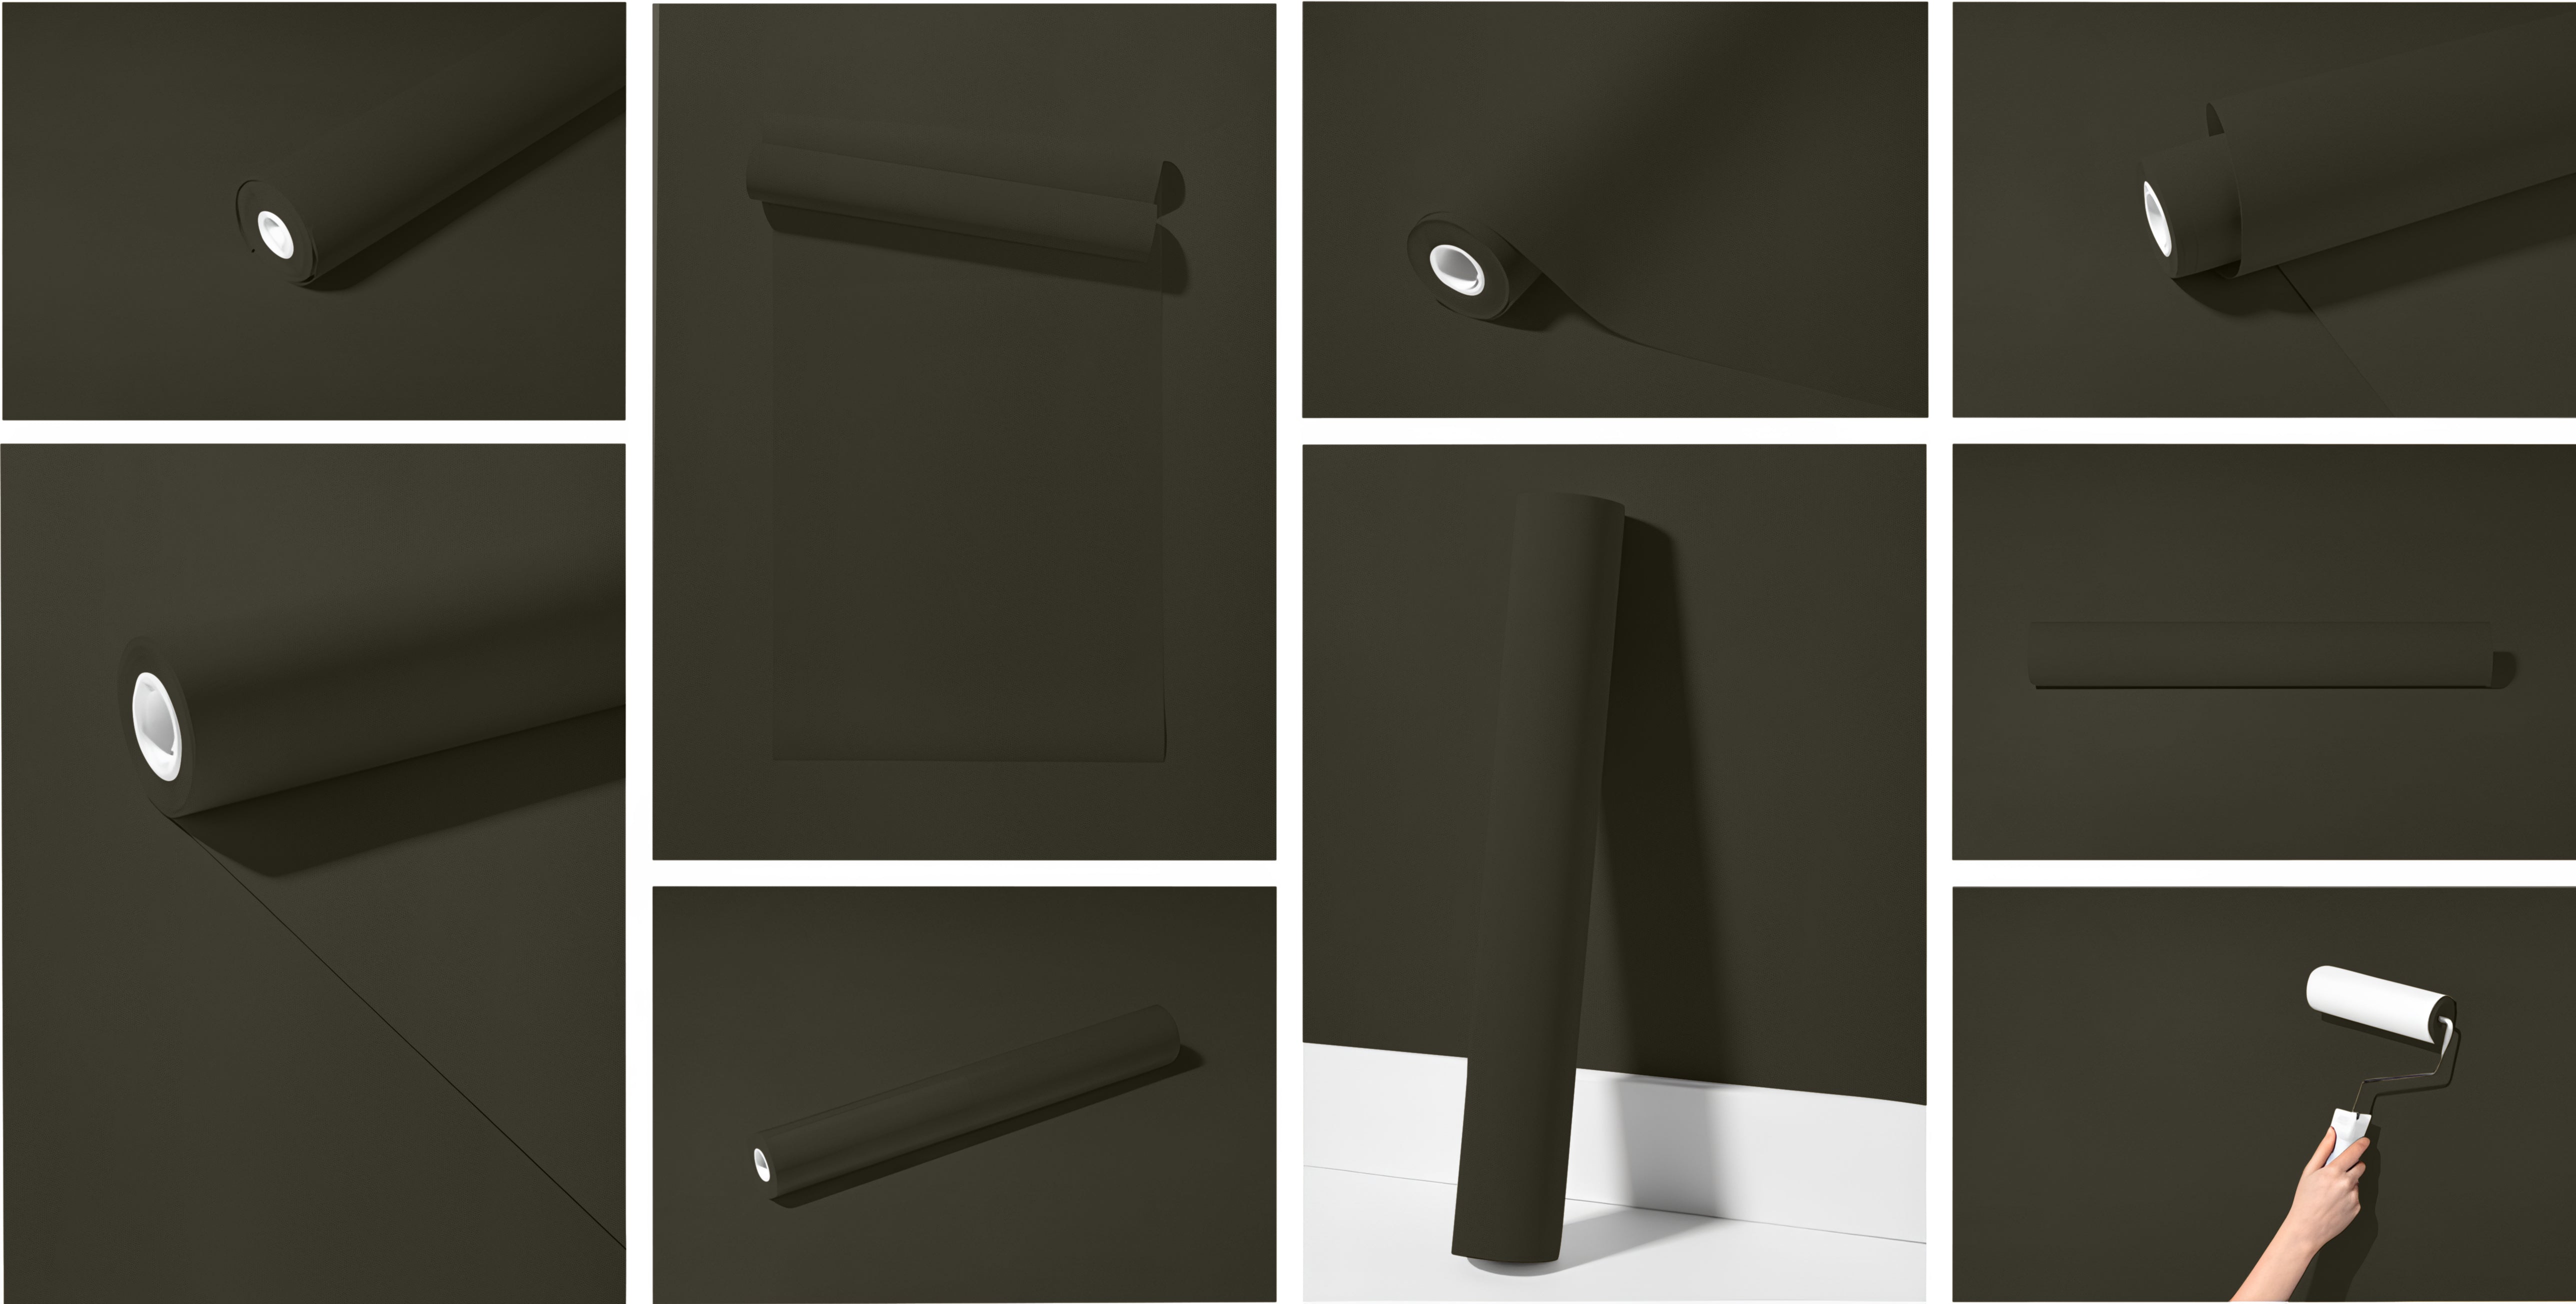 Peel & Stick Removable Re-usable Paint - Color RAL 6006 Grey Olive - offRAL™ - RALRAW LLC, USA